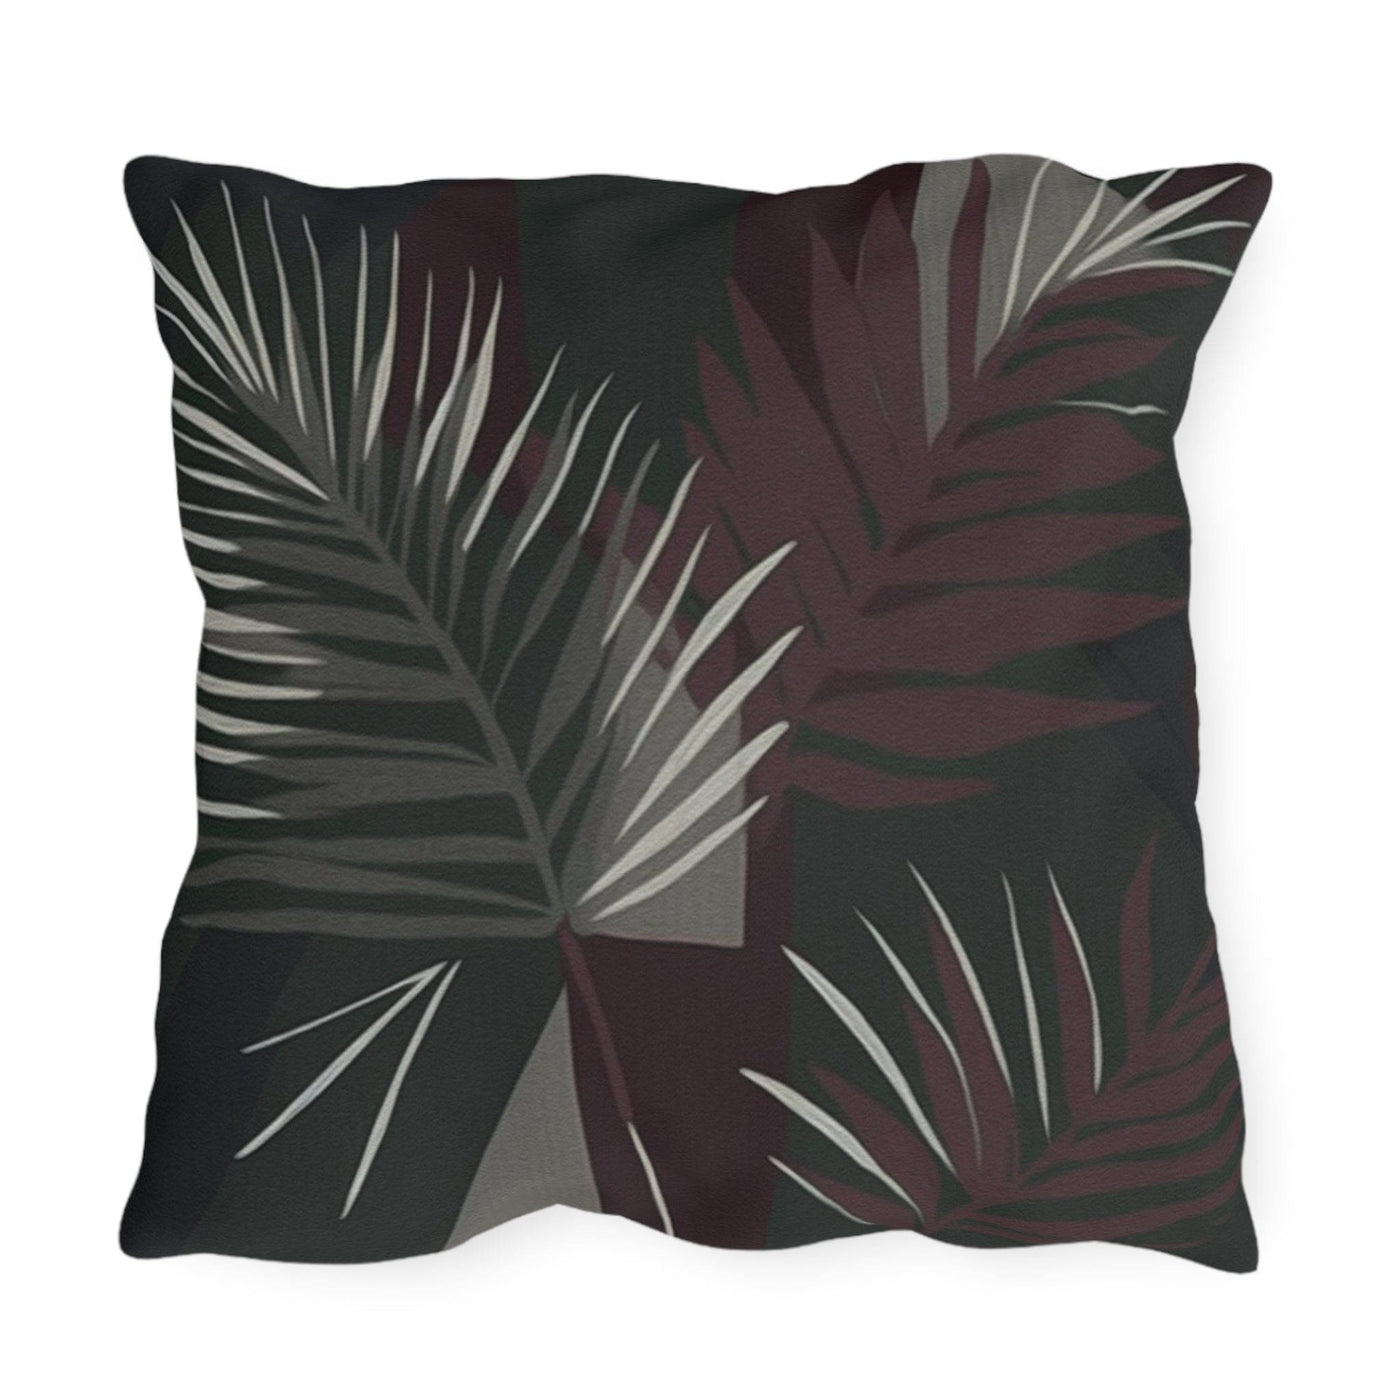 Decorative Outdoor Pillows With Zipper - Set Of 2 Palm Tree Leaves Maroon Green